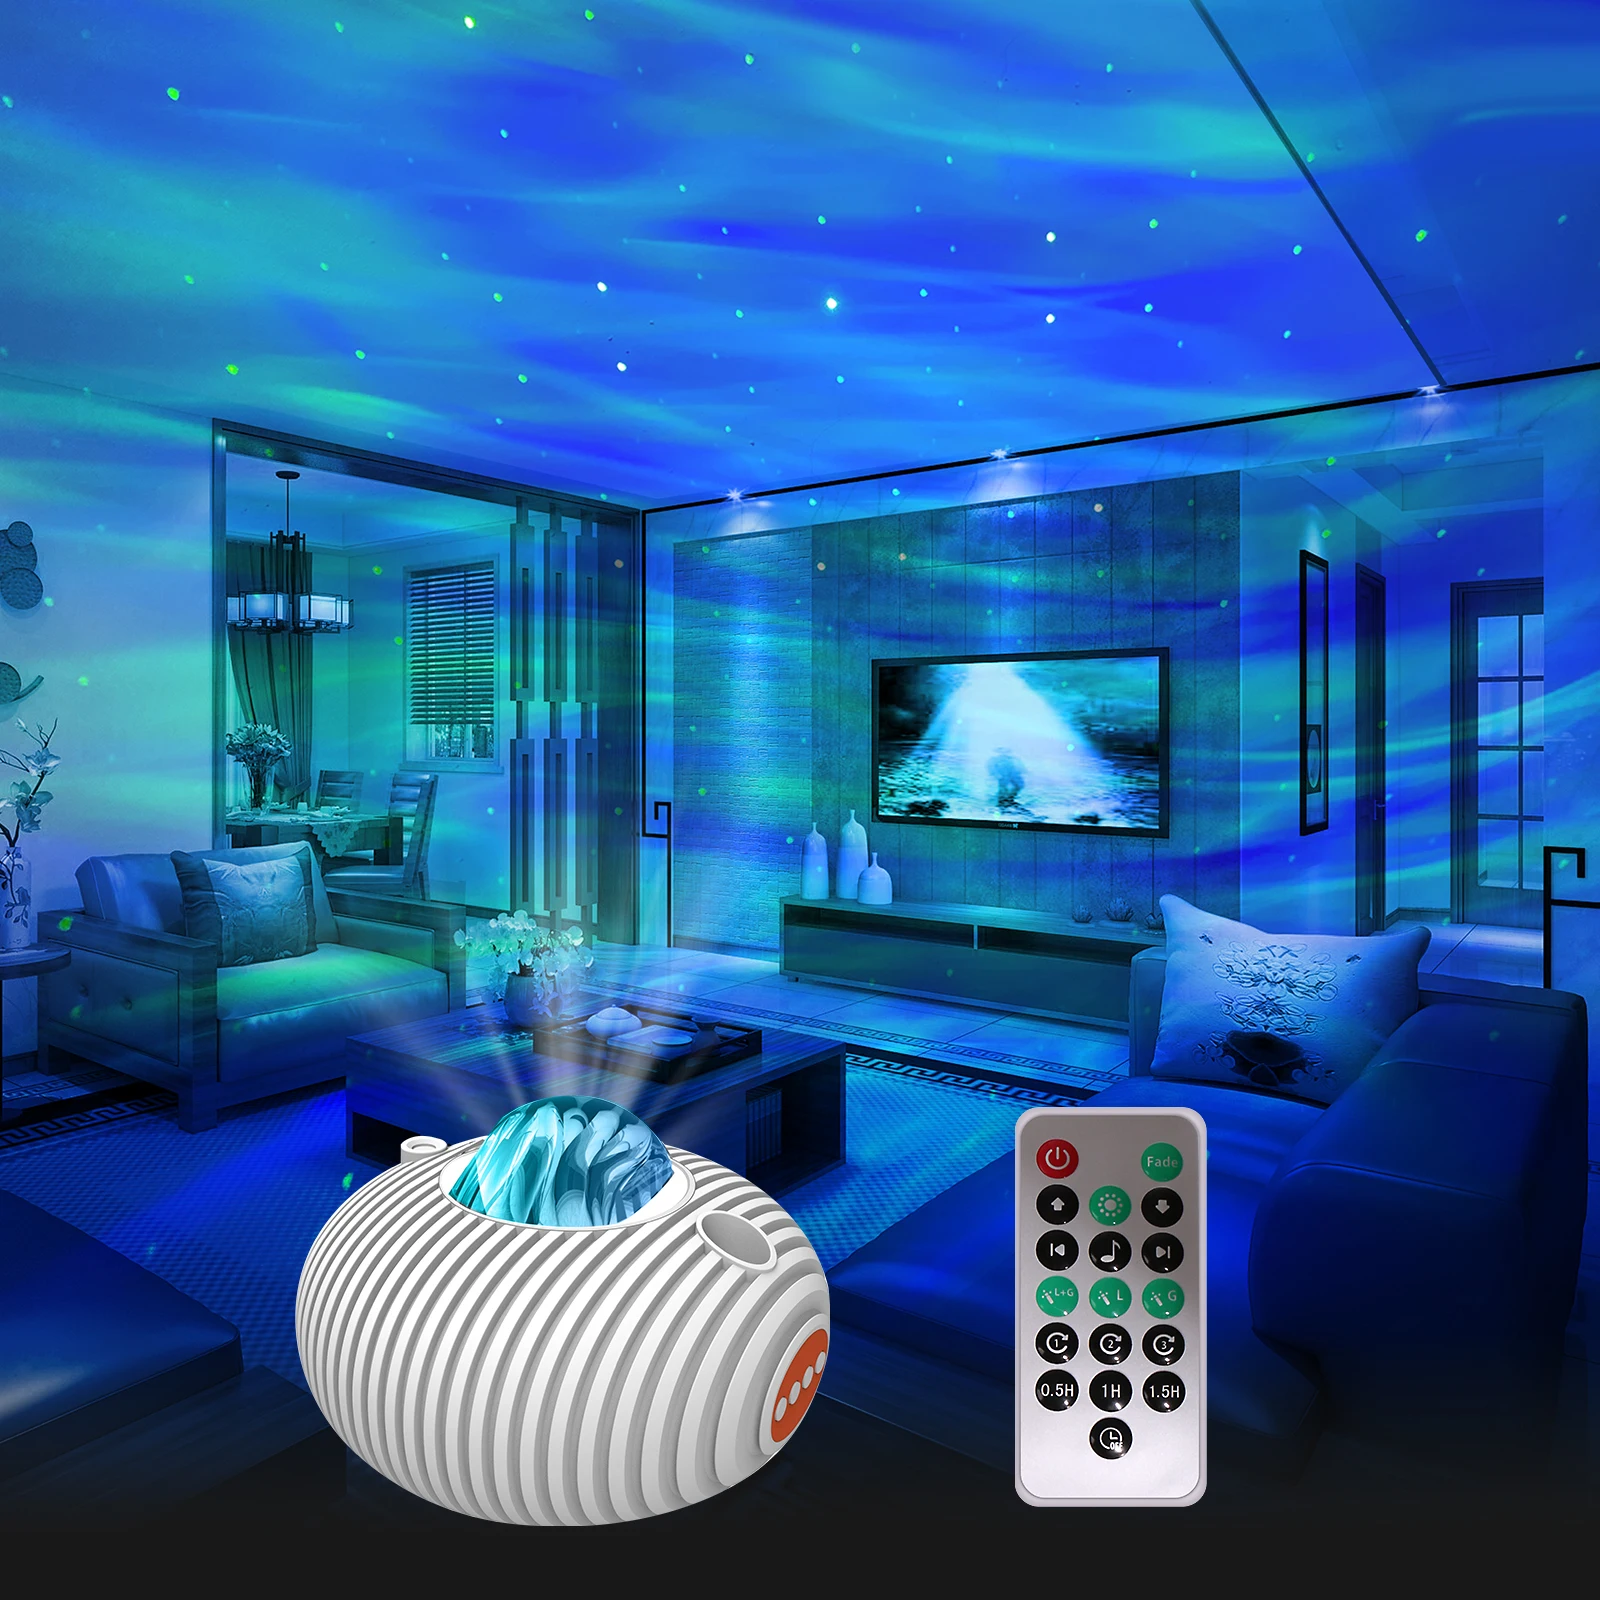 

LED Star Galaxy Projector Starry Sky Night Light Built-in BT-Speaker For Home Bedroom Decoration Kids Valentine's Day giftS